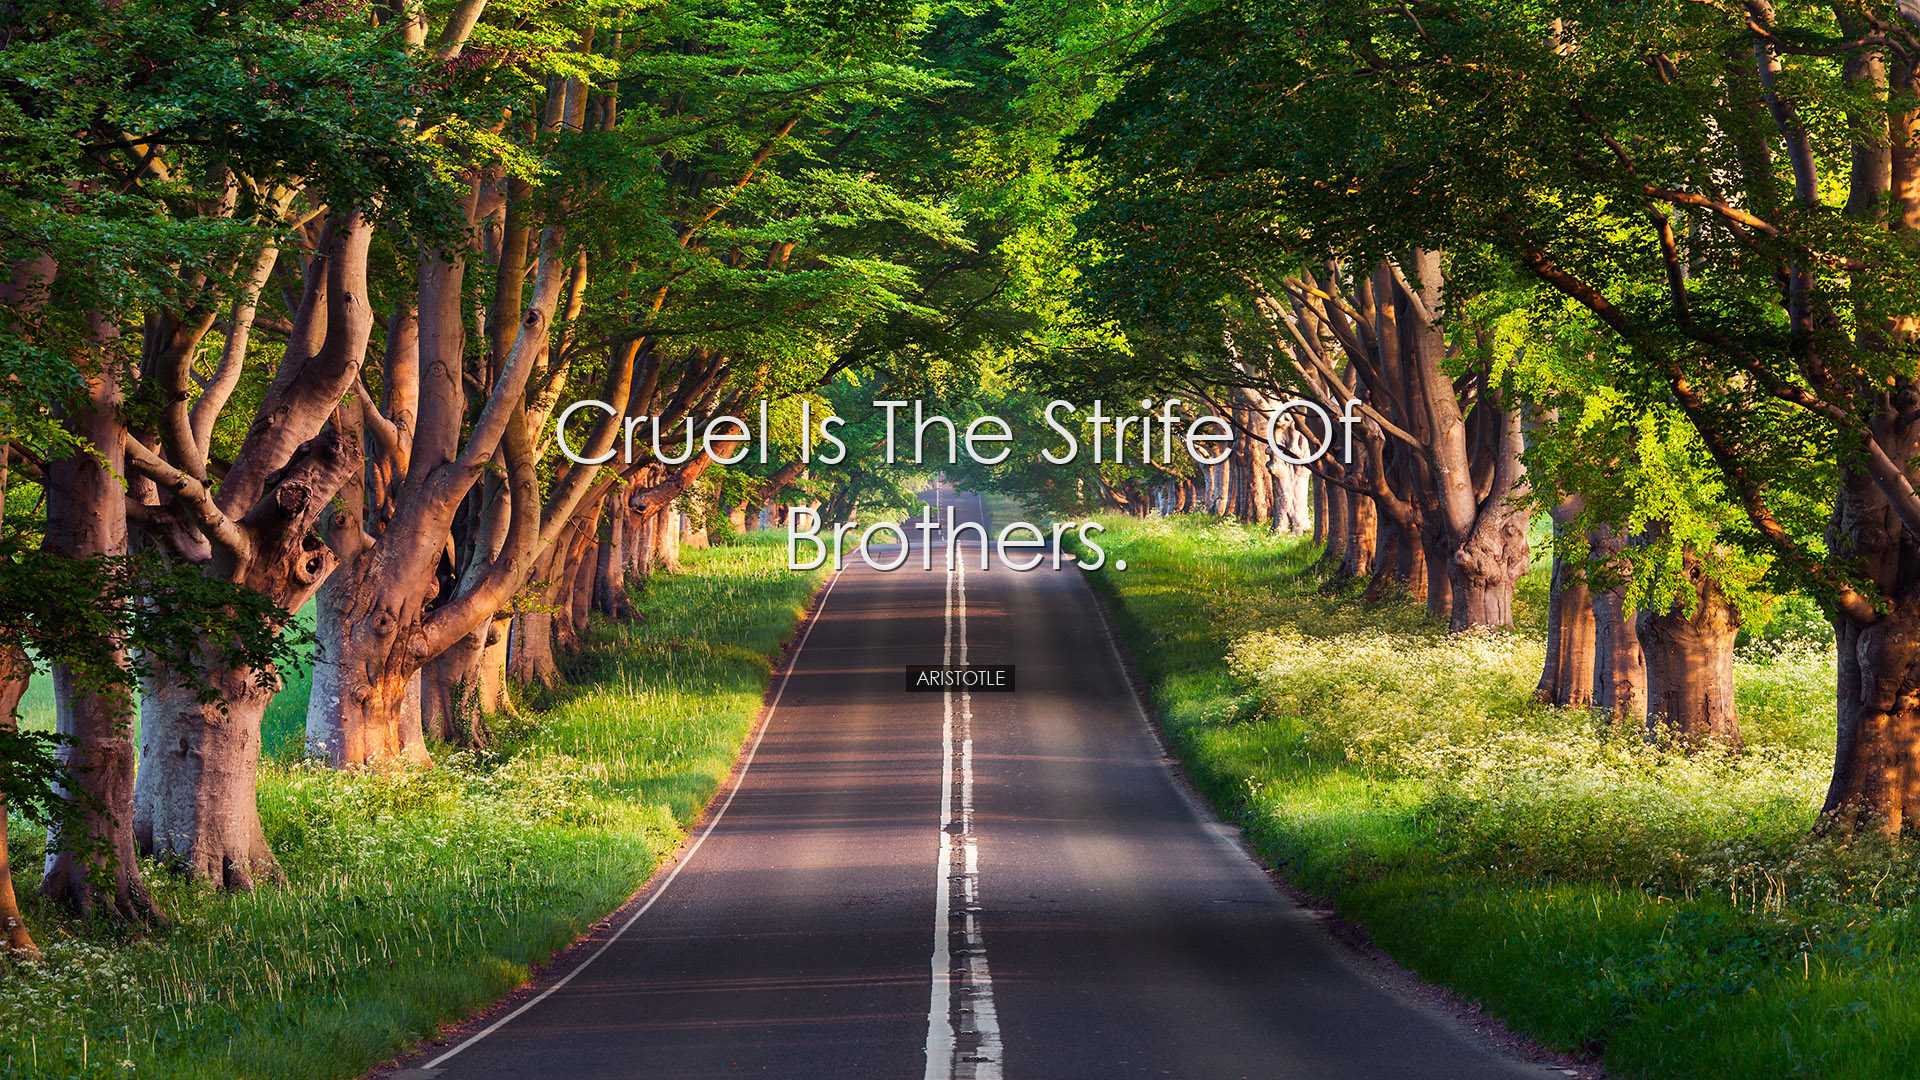 Cruel is the strife of brothers. - Aristotle